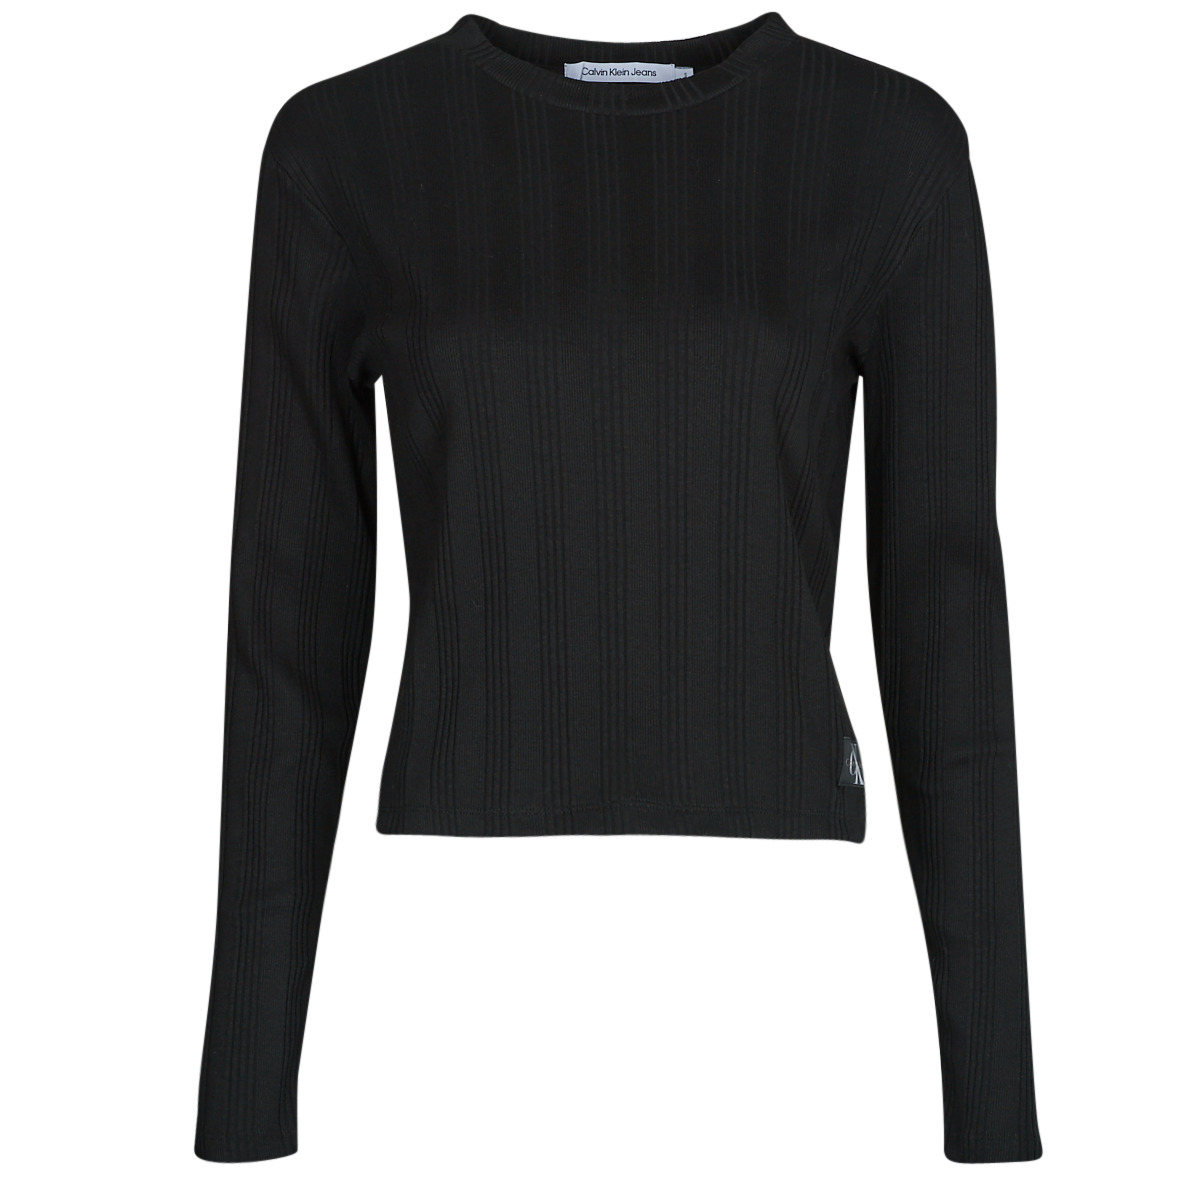 Calvin Klein Jeans BADGE Black shirts Spartoo ! - SLEEVE Women LONG RIB Free NET | sleeved - Clothing Long delivery TEE BABY